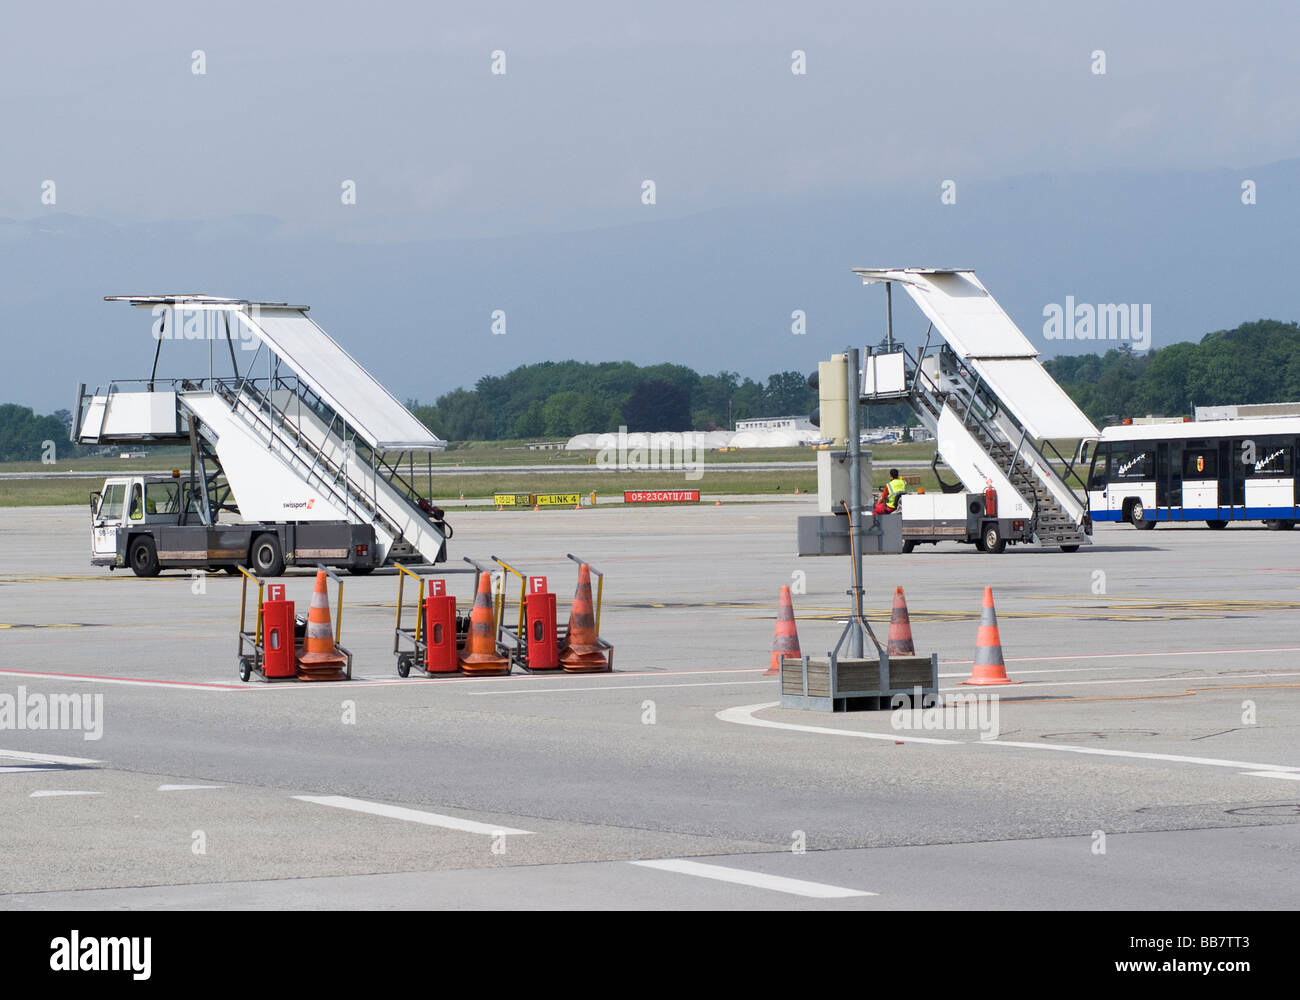 Mobile Aircraft Stairways and Passenger Bus near Remote Stands at Geneva Airport Switzerland Geneve Suisse Stock Photo